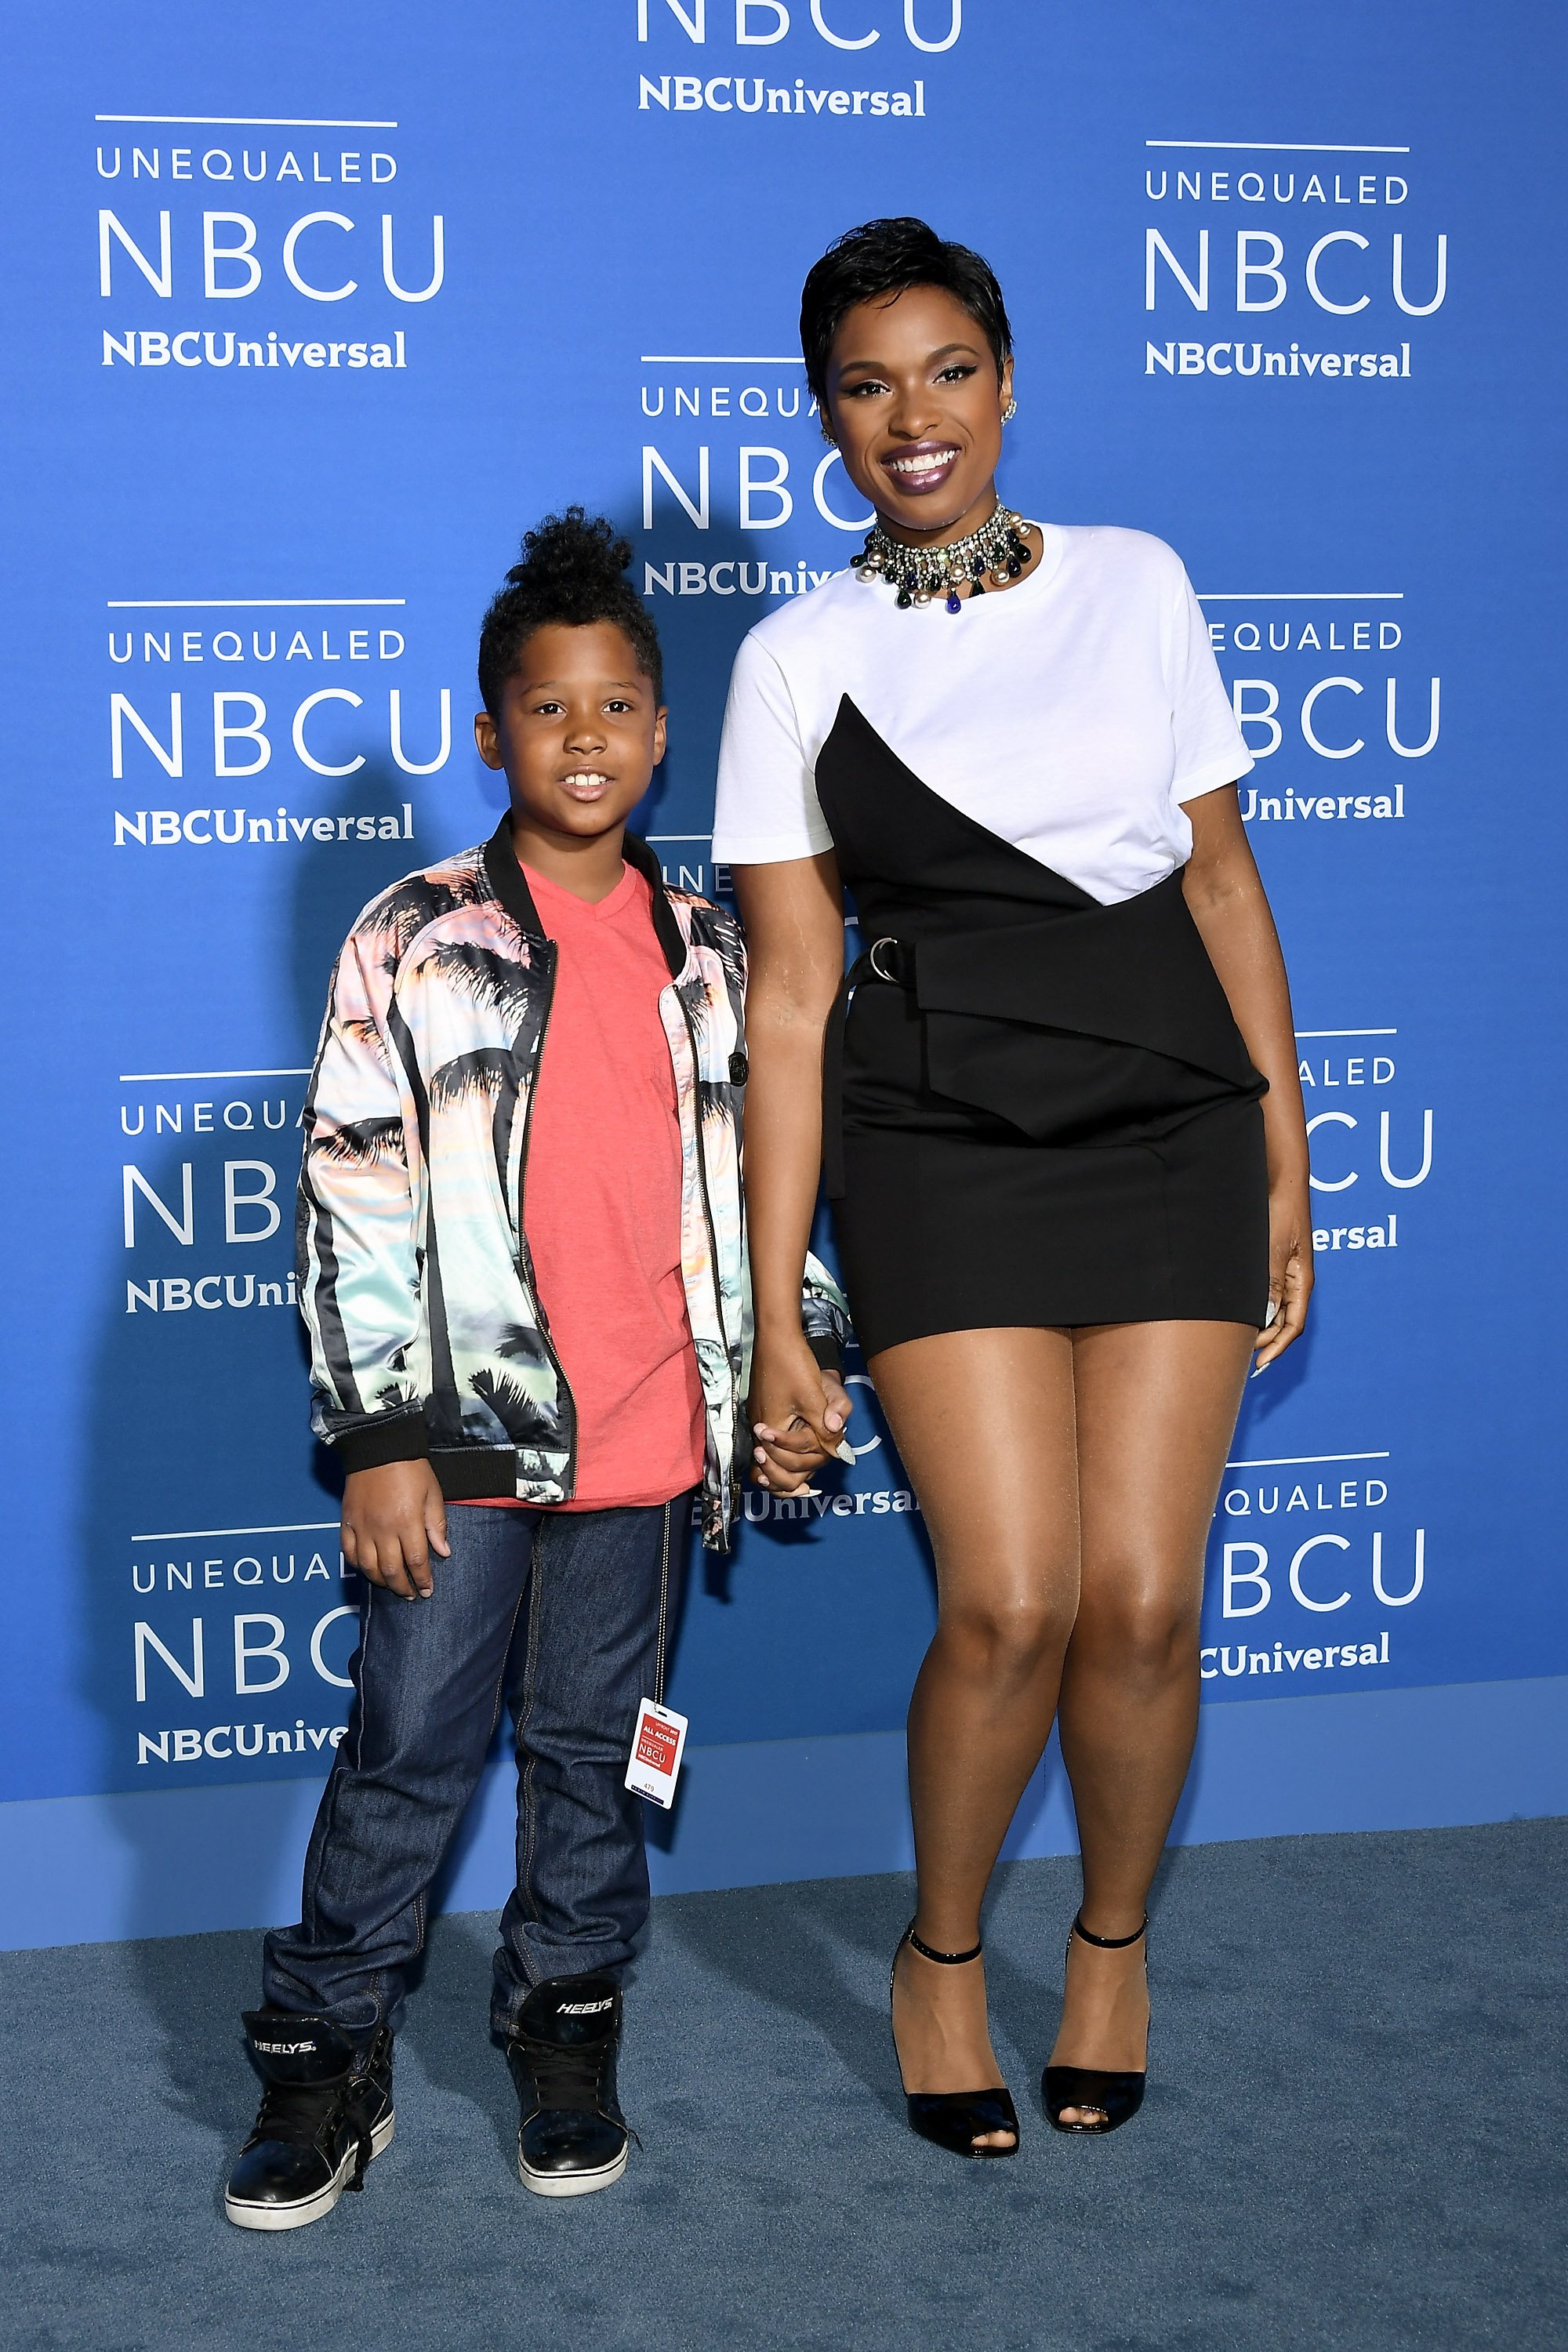 Jennifer Hudson and son David Otunga Jr. at the 2017 NBCUniversal Upfront on May 15, 2017 in New York City | Photo: Getty Images